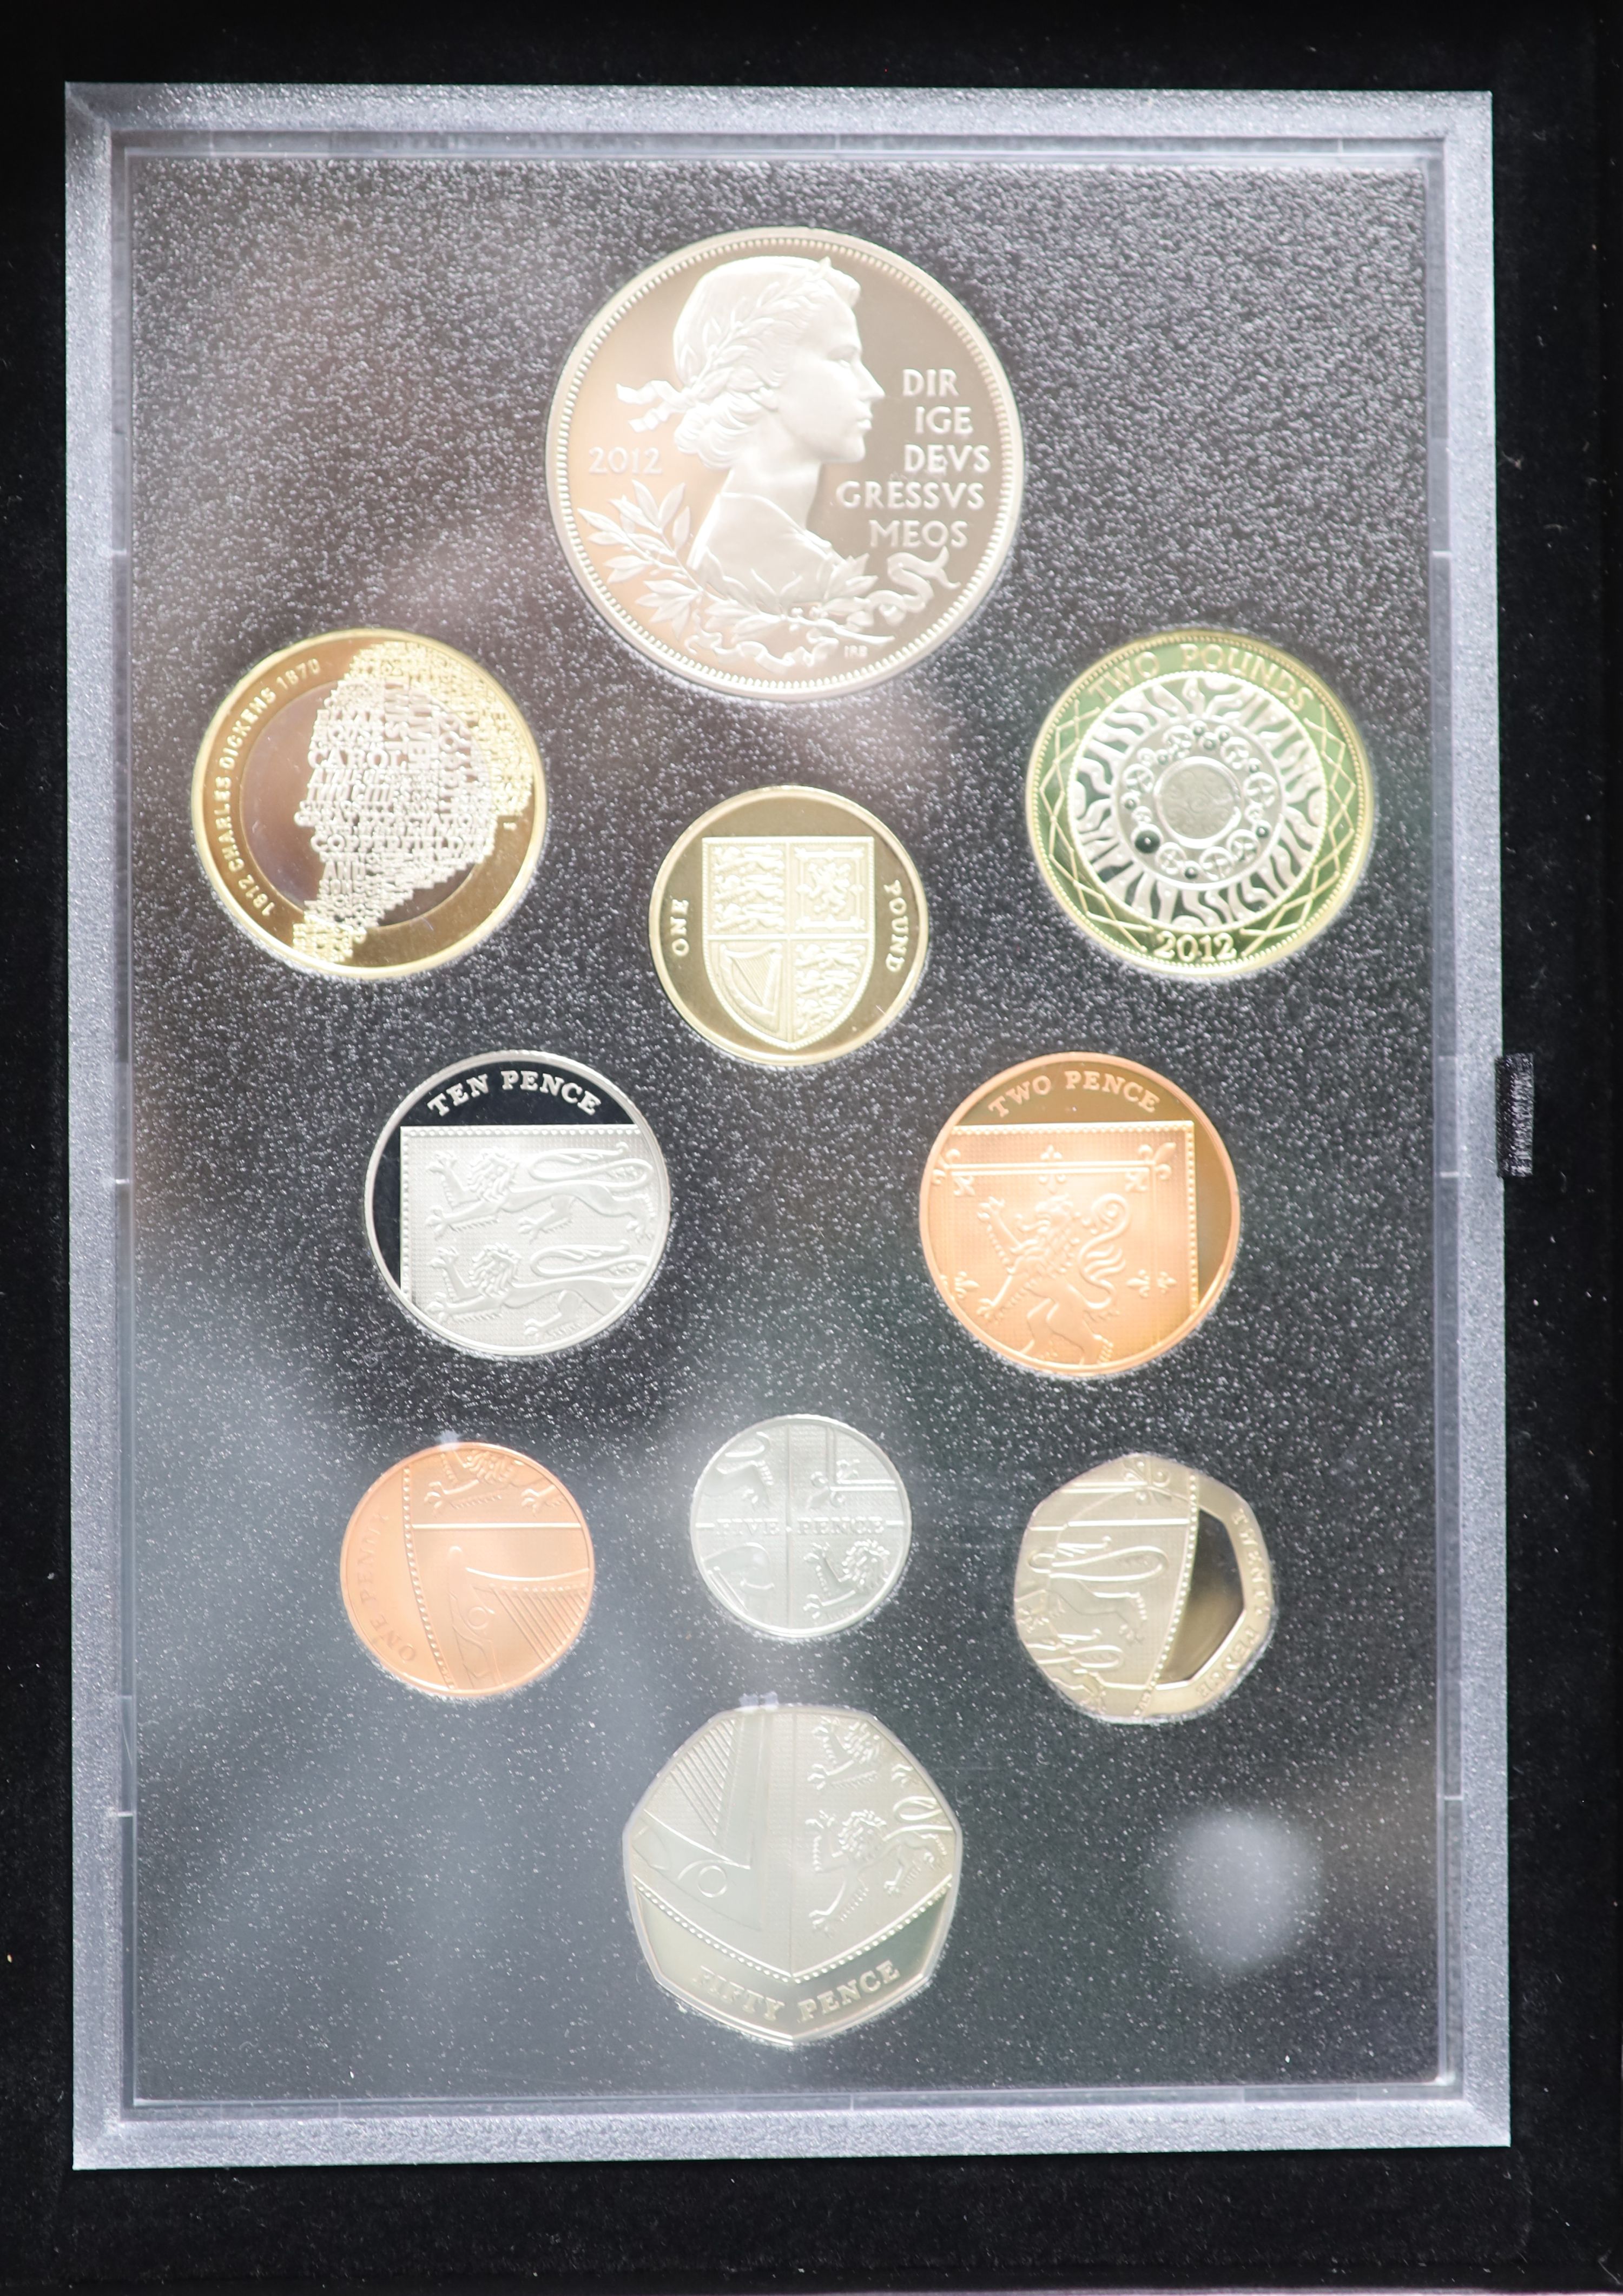 Three Royal Mint UK proof coin years sets; 2010, 2011 and 2012 together with other Royal Mint coins of EF grade or better (some possibl